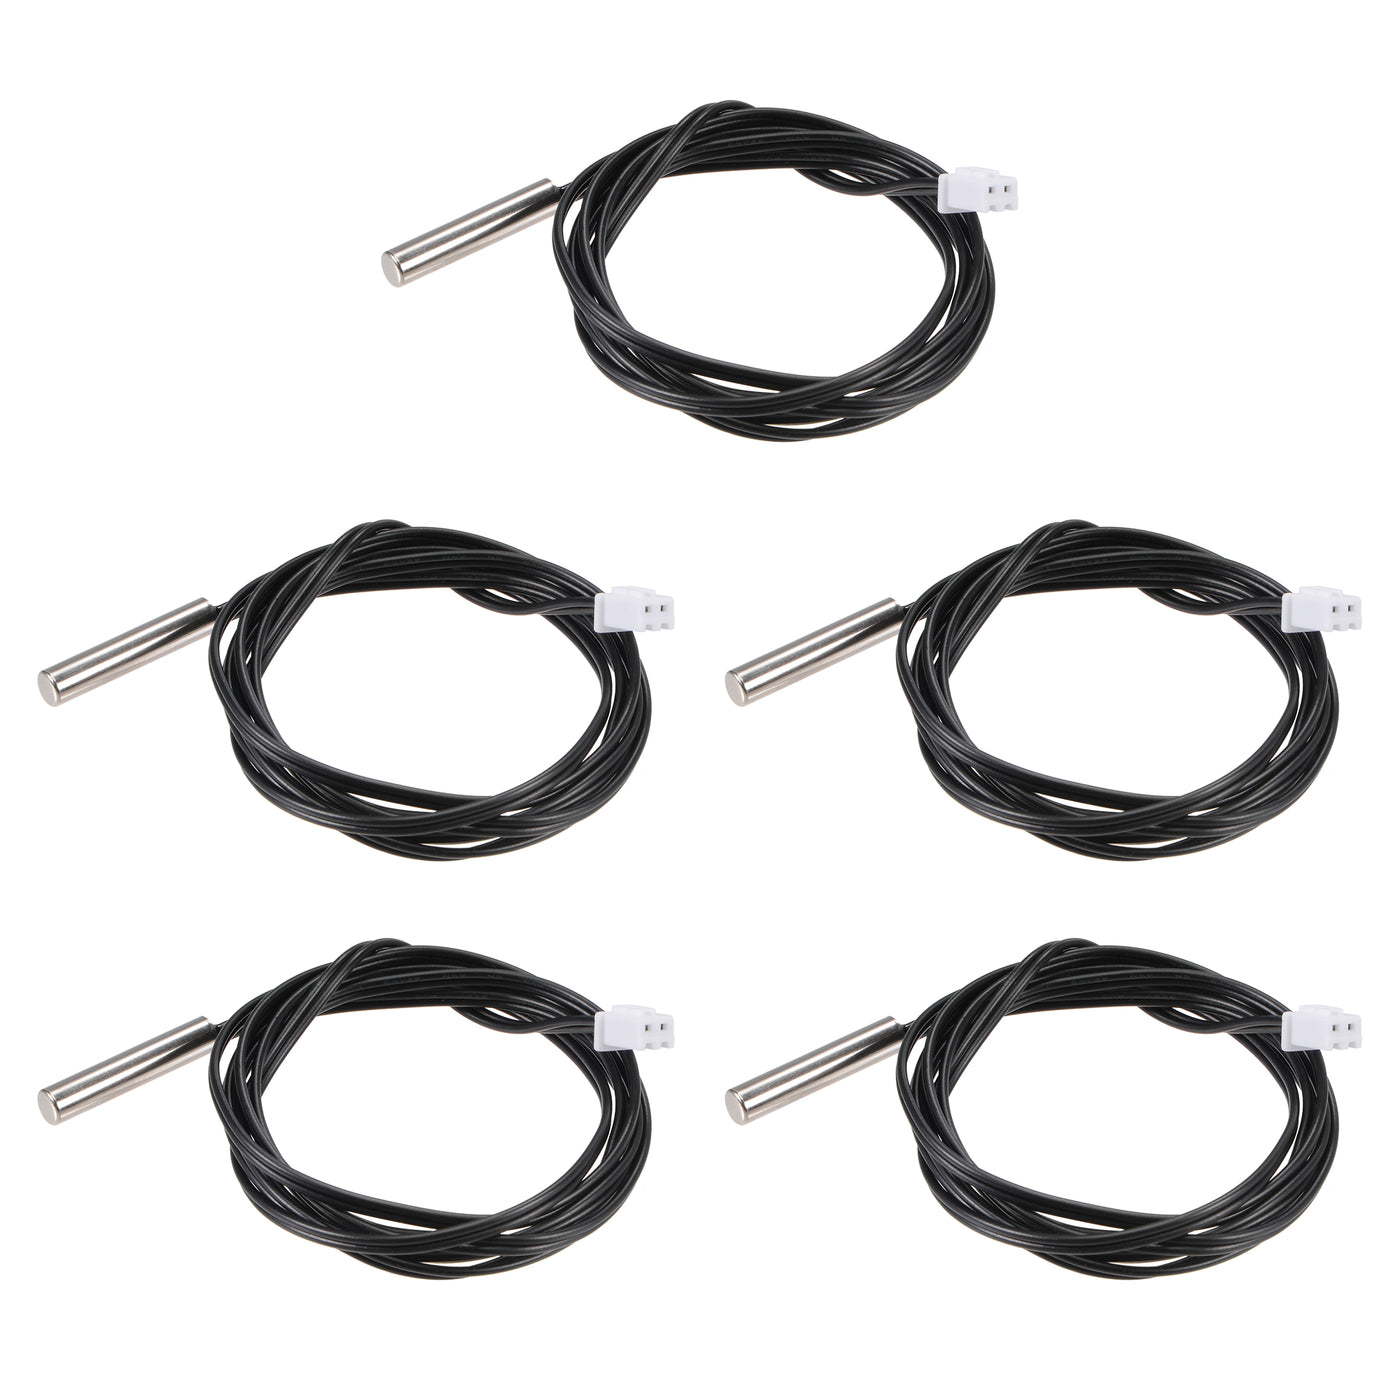 uxcell Uxcell 5pcs 10K Temperature Sensor Probe, Stainless Steel NTC Thermal Sensor Probe 3.3ft Digital Thermometer Extension Cable